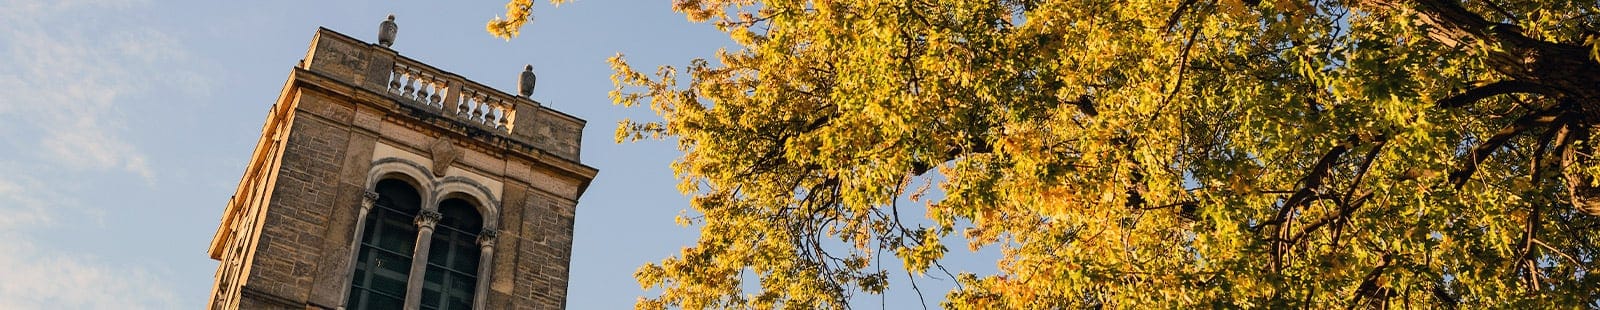 The carillon bell tower is framed by a tree with golden leaves and a blue sky in the background.